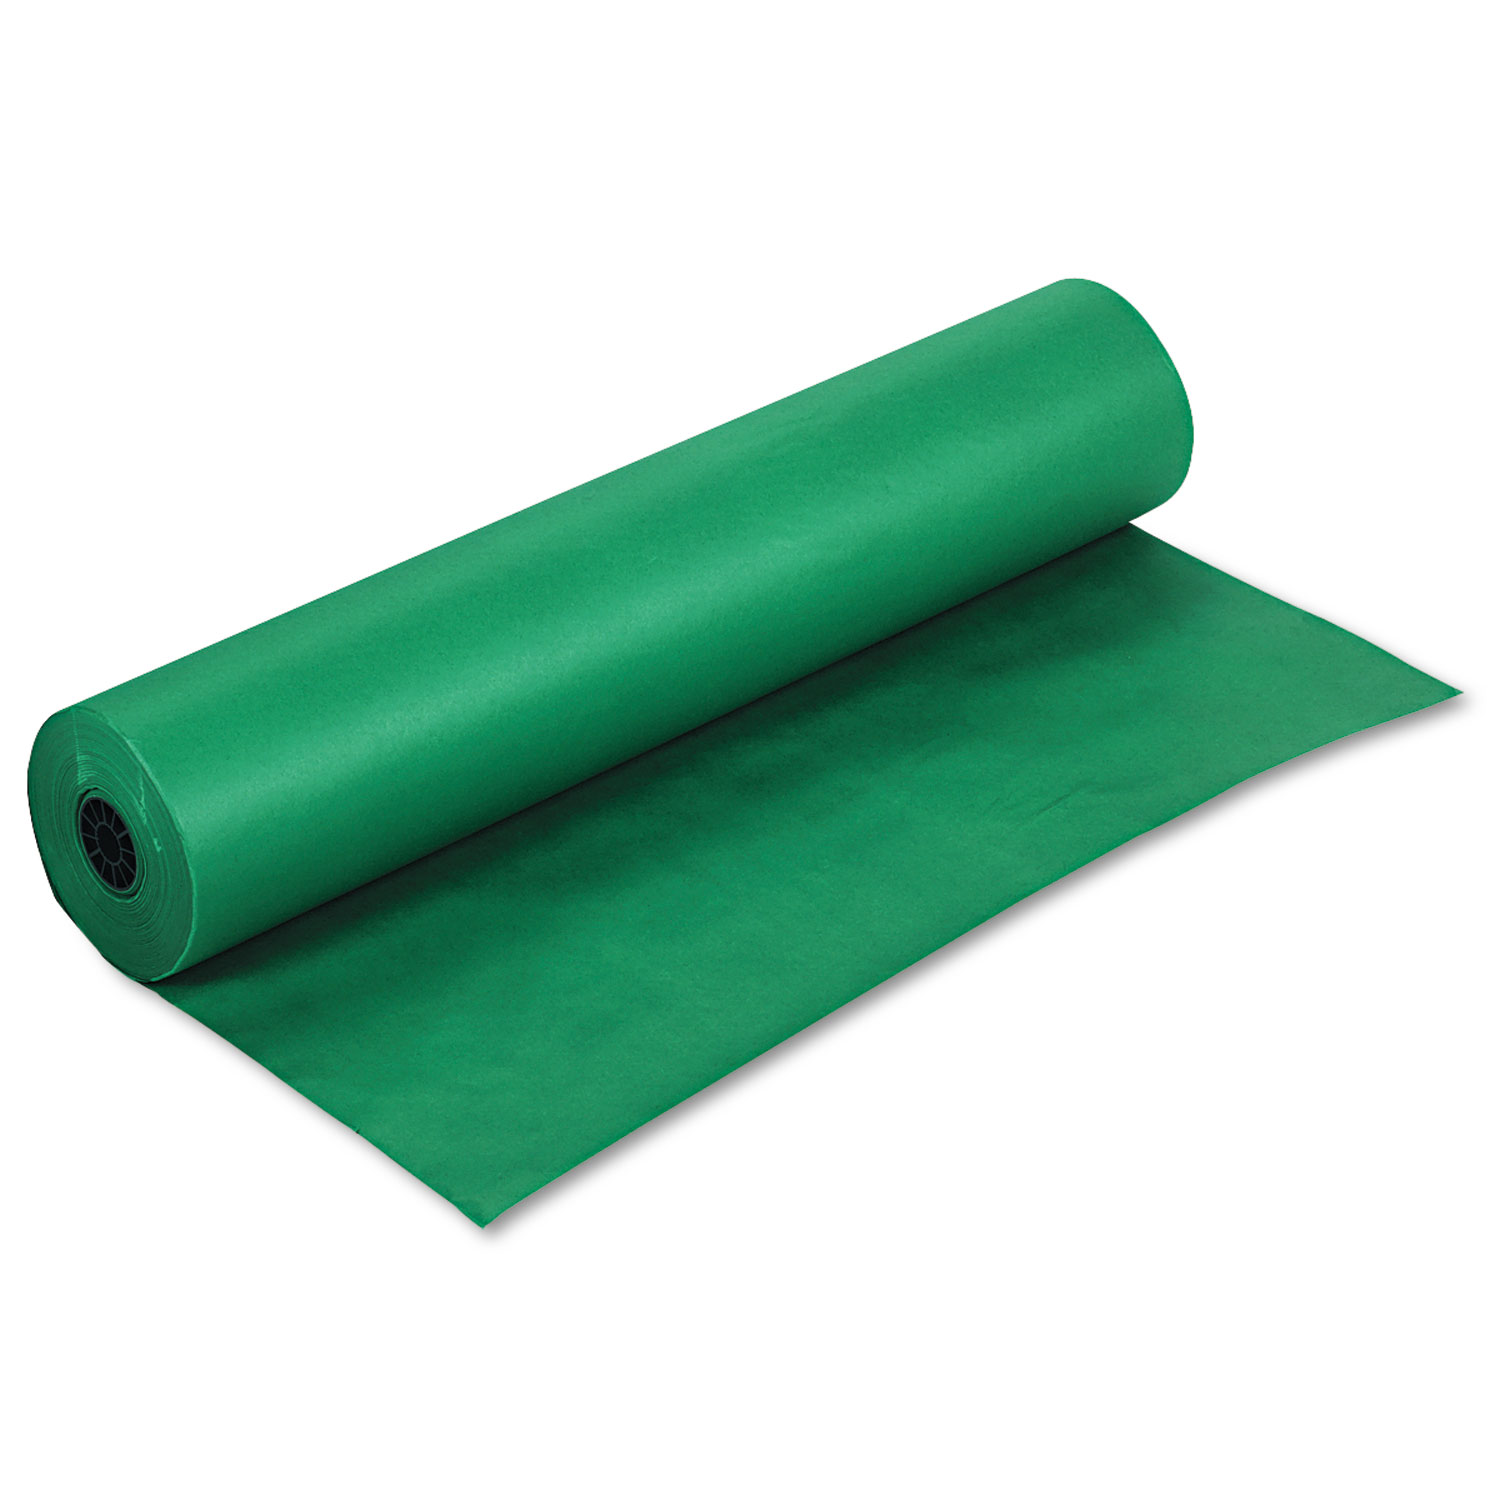  Pacon 63140 Rainbow Duo-Finish Colored Kraft Paper, 35lb, 36 x 1000ft, Emerald (PAC63140) 